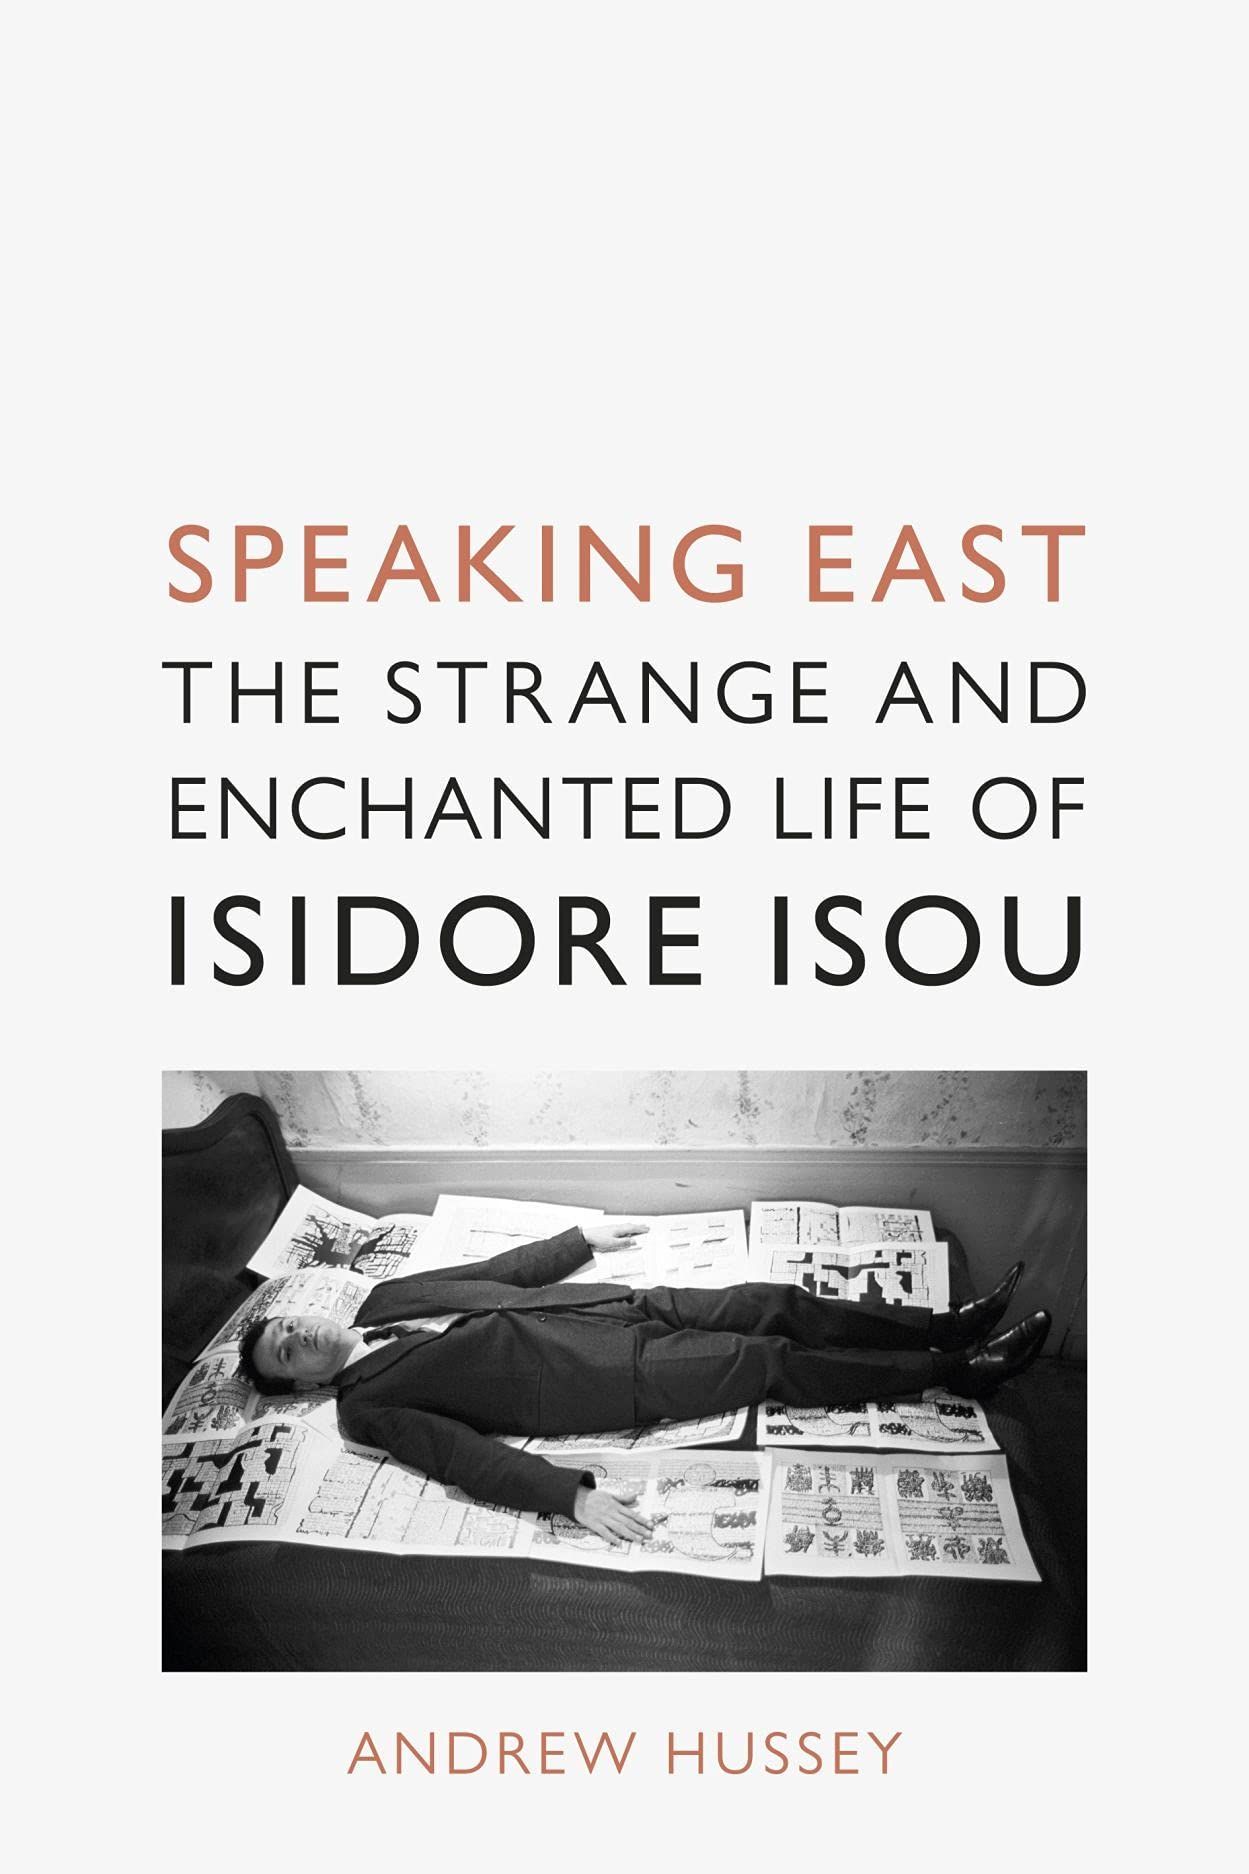 Madness as Method: On Andrew Hussey’s “Speaking East: The Strange and Enchanted Life of Isidore Isou”